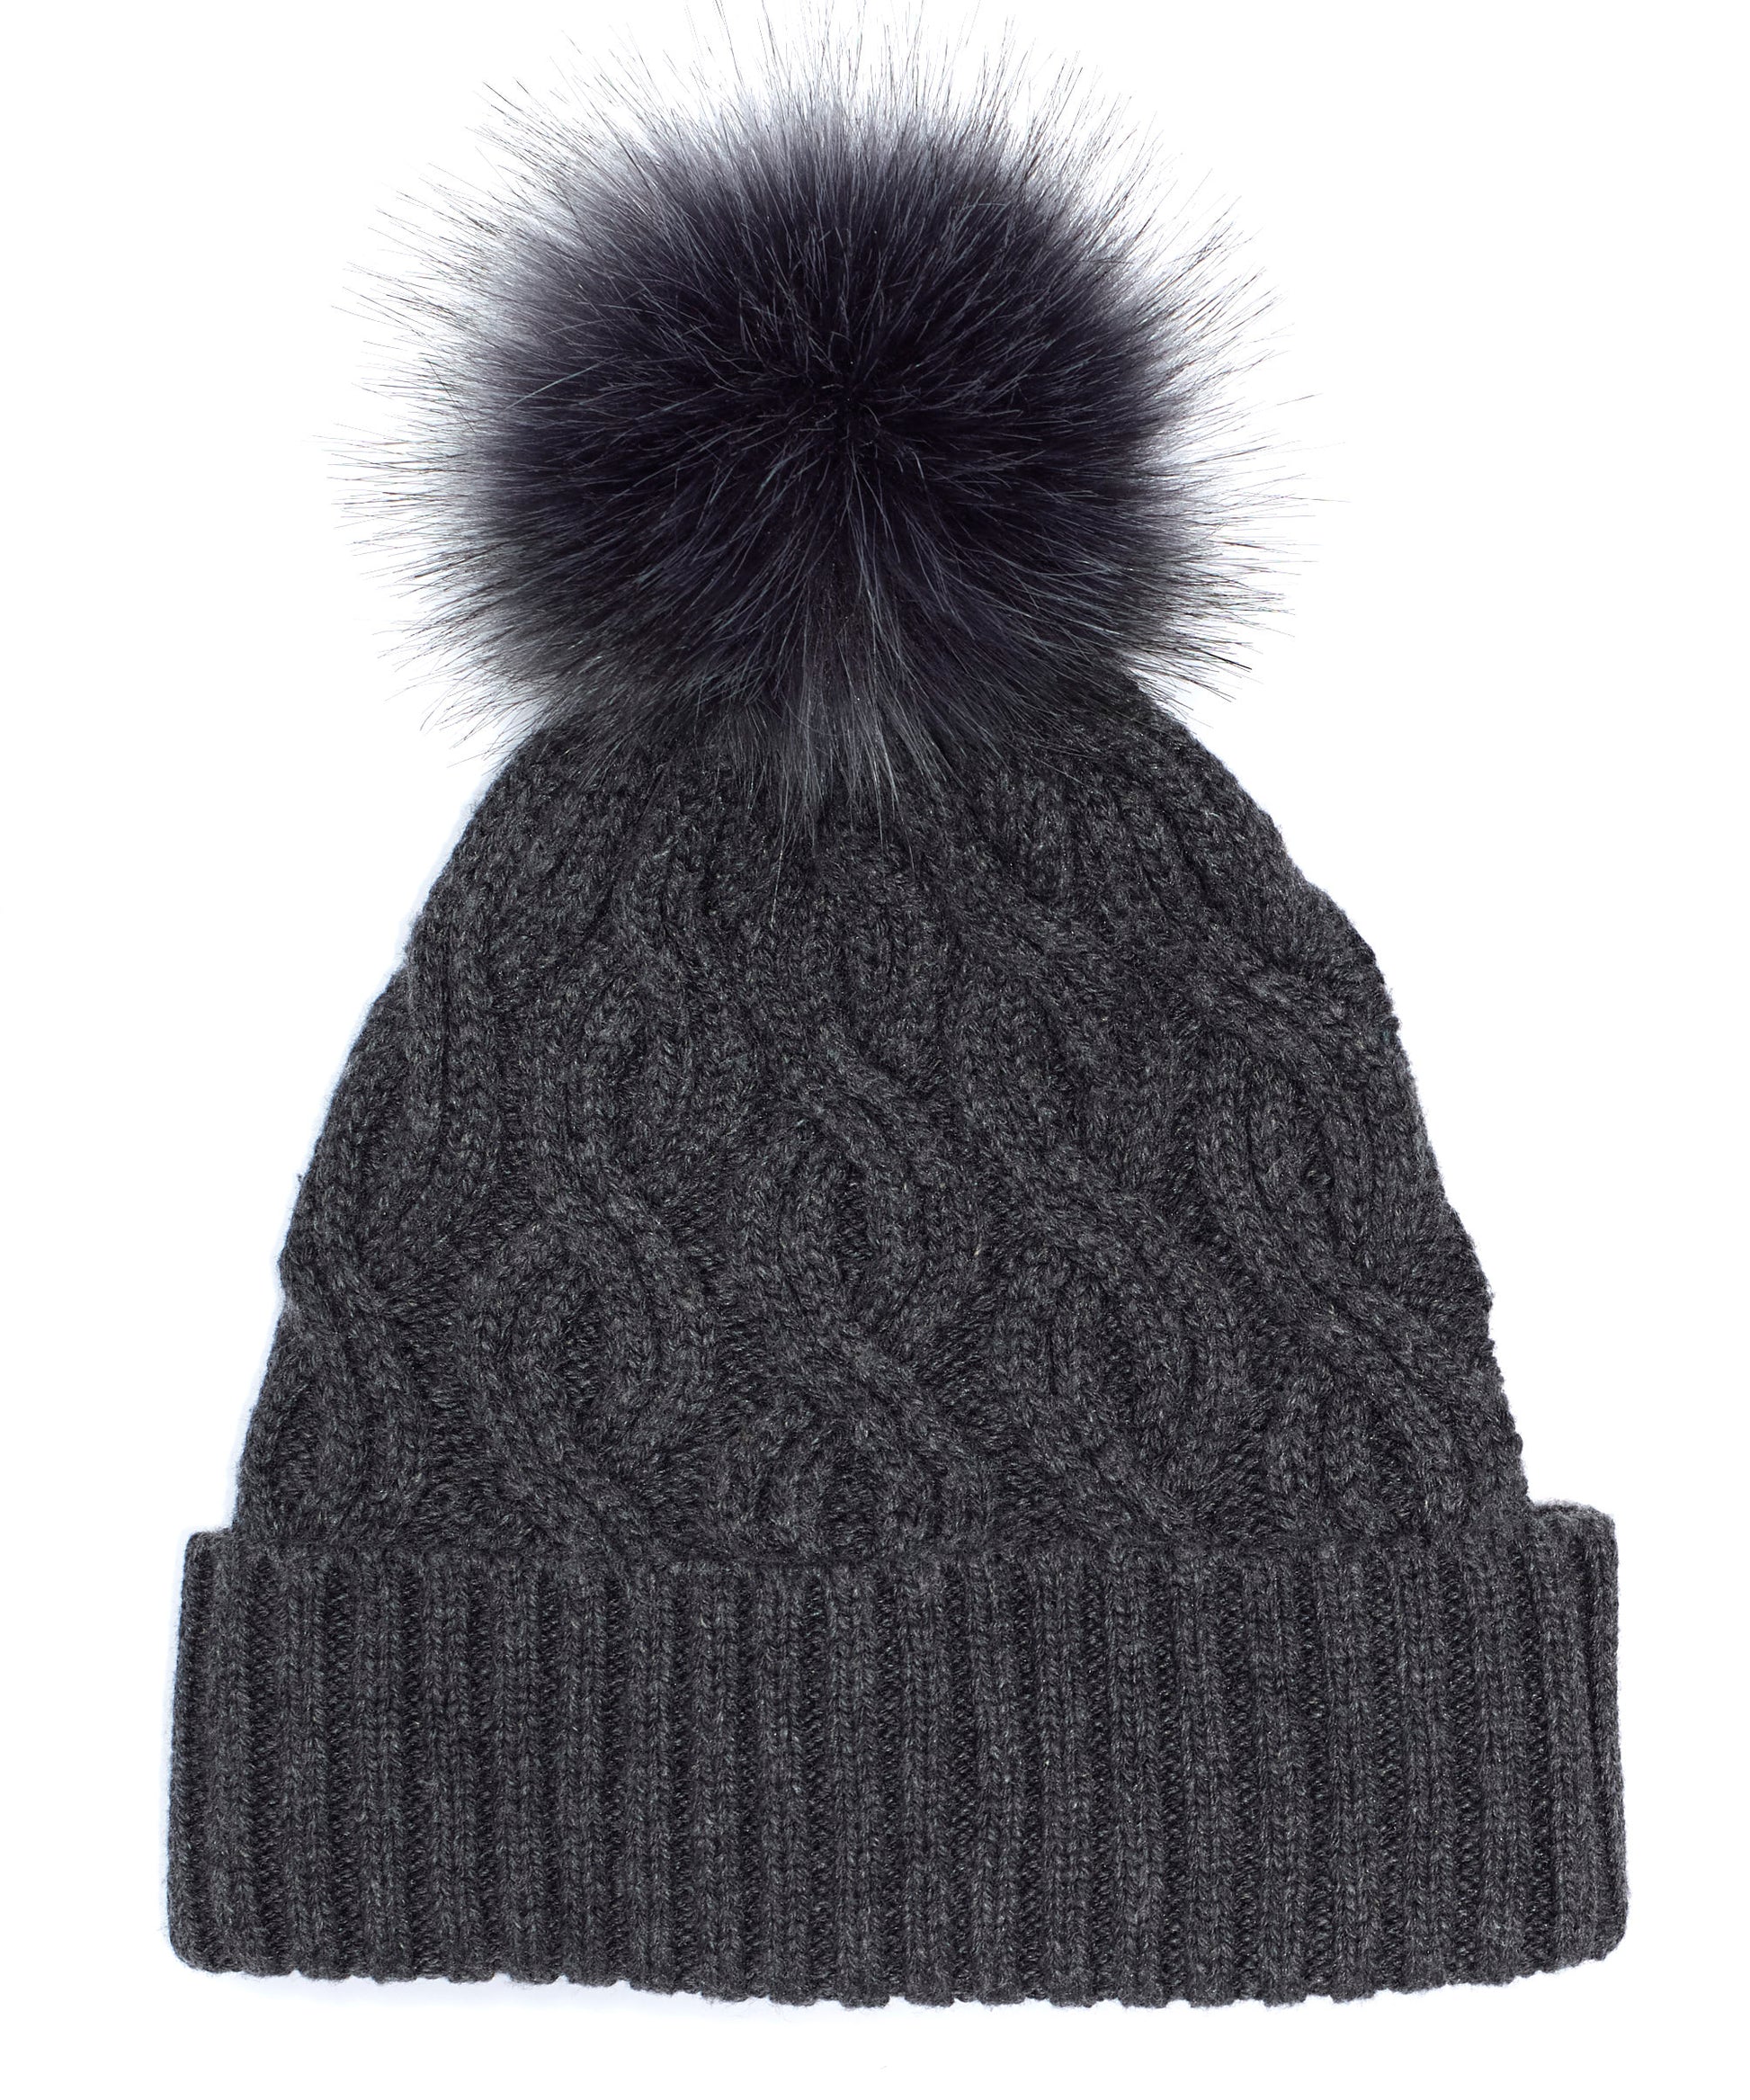 Recycled Pom Hat in color Charcoal